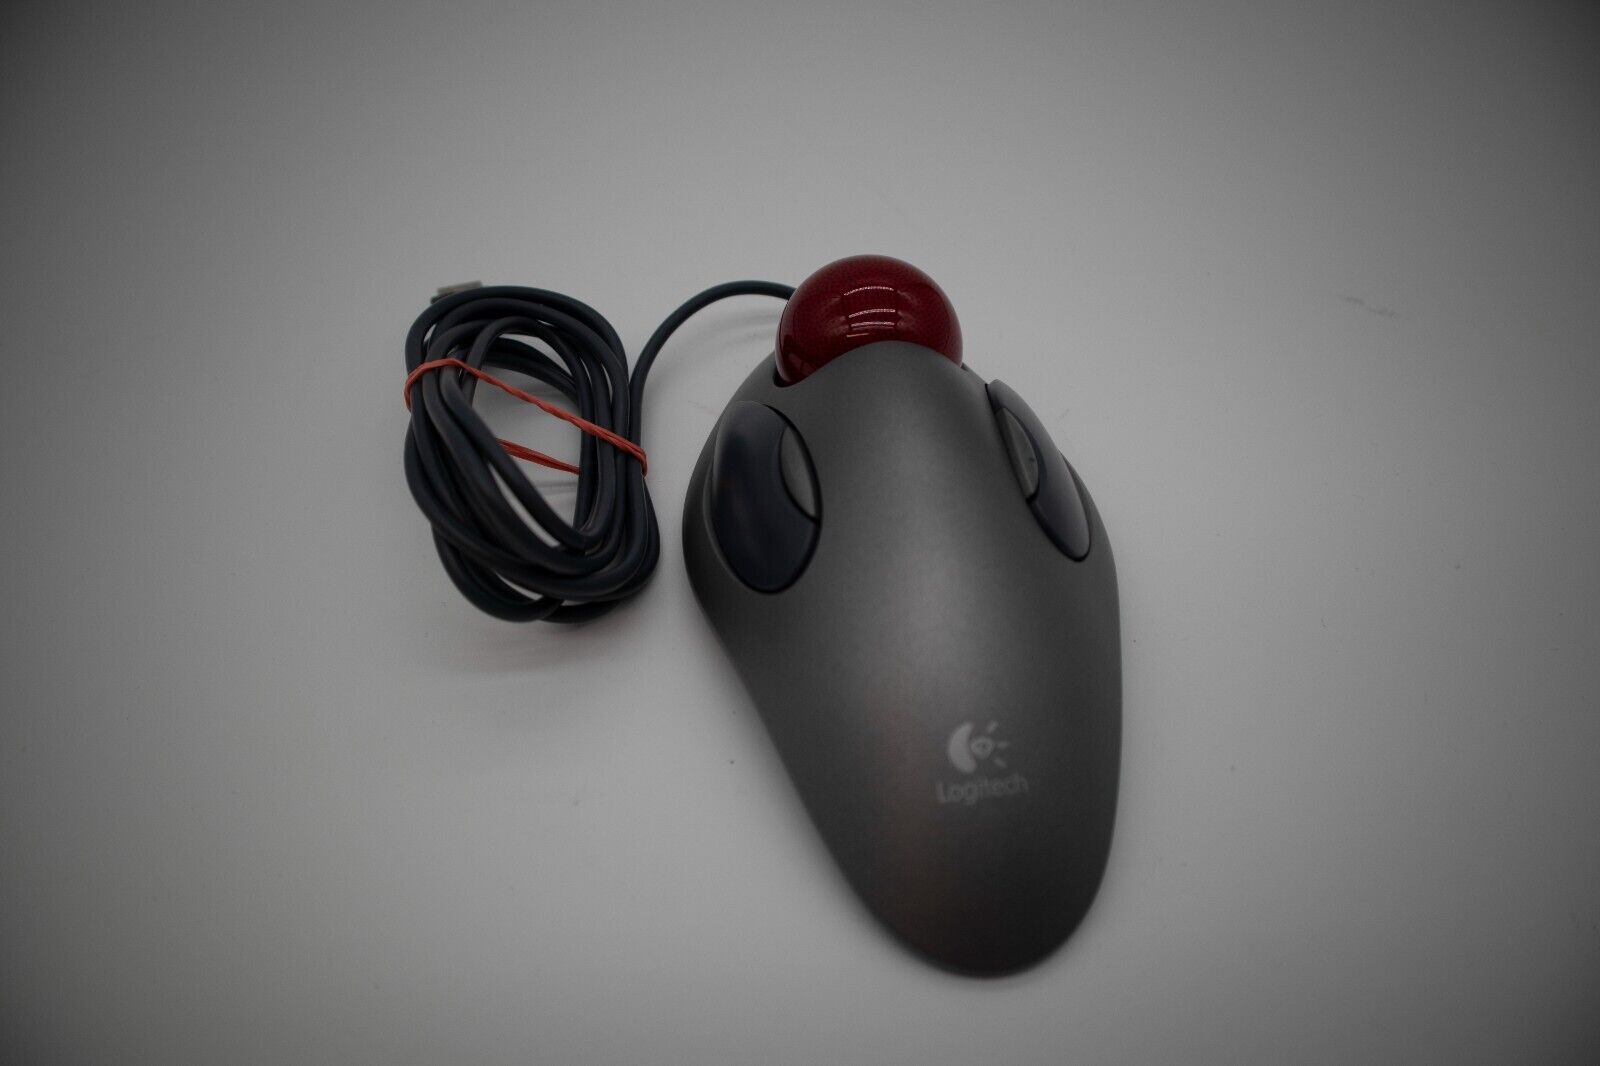 Logitech T-BC21 810-000767 Track Ball USB Mouse Tested and Working